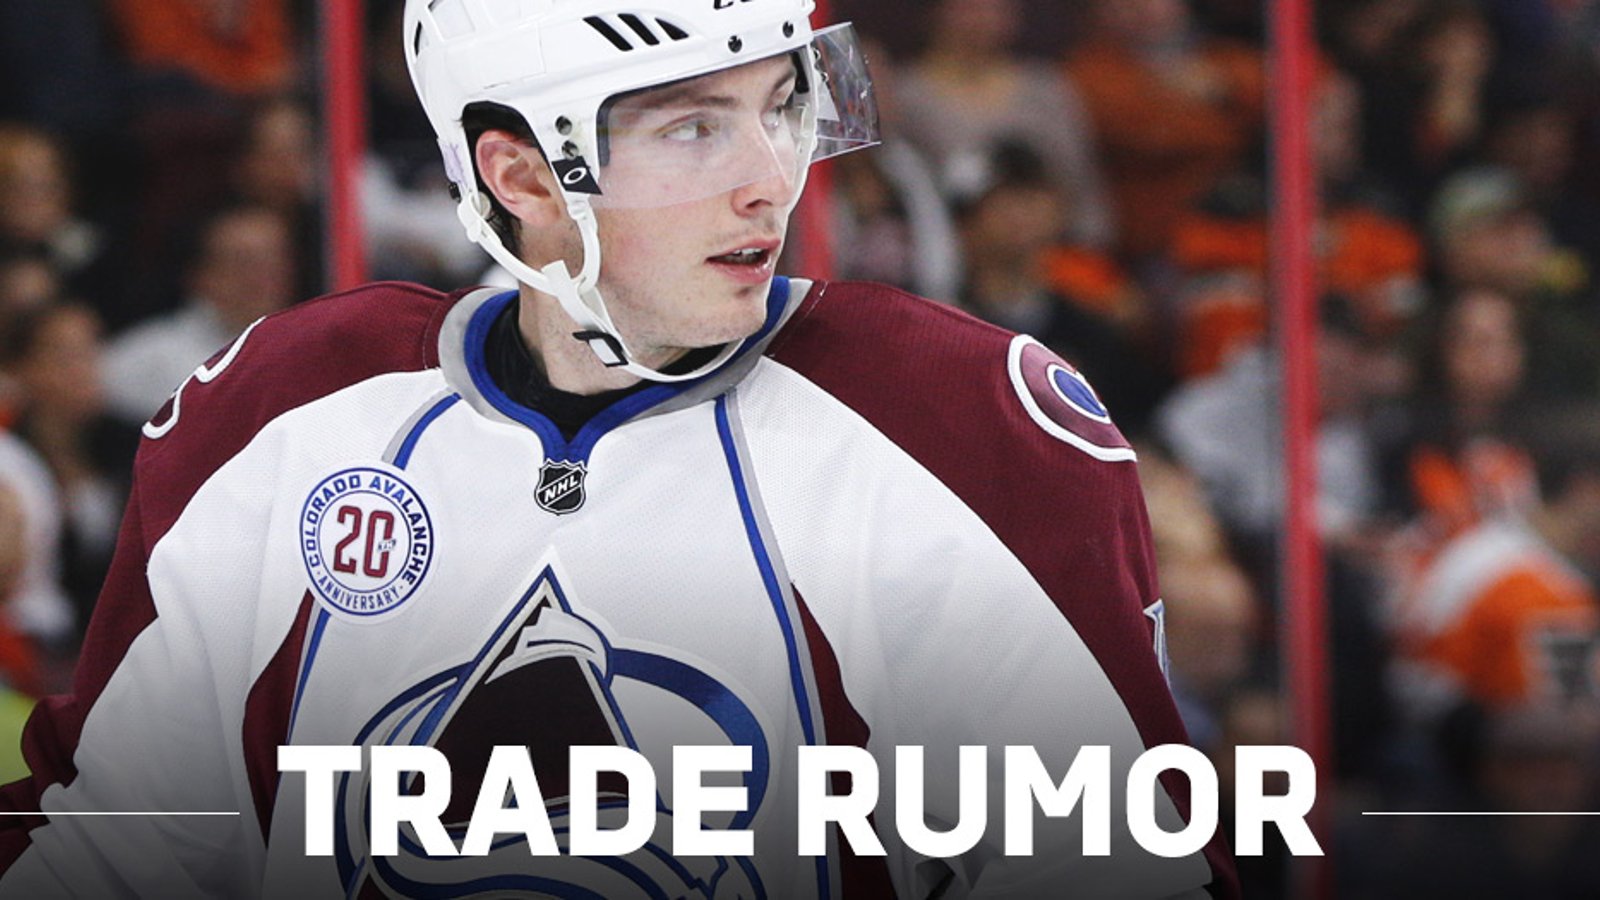 Exclusive: Source confirms what one original 6 team offered for Duchene